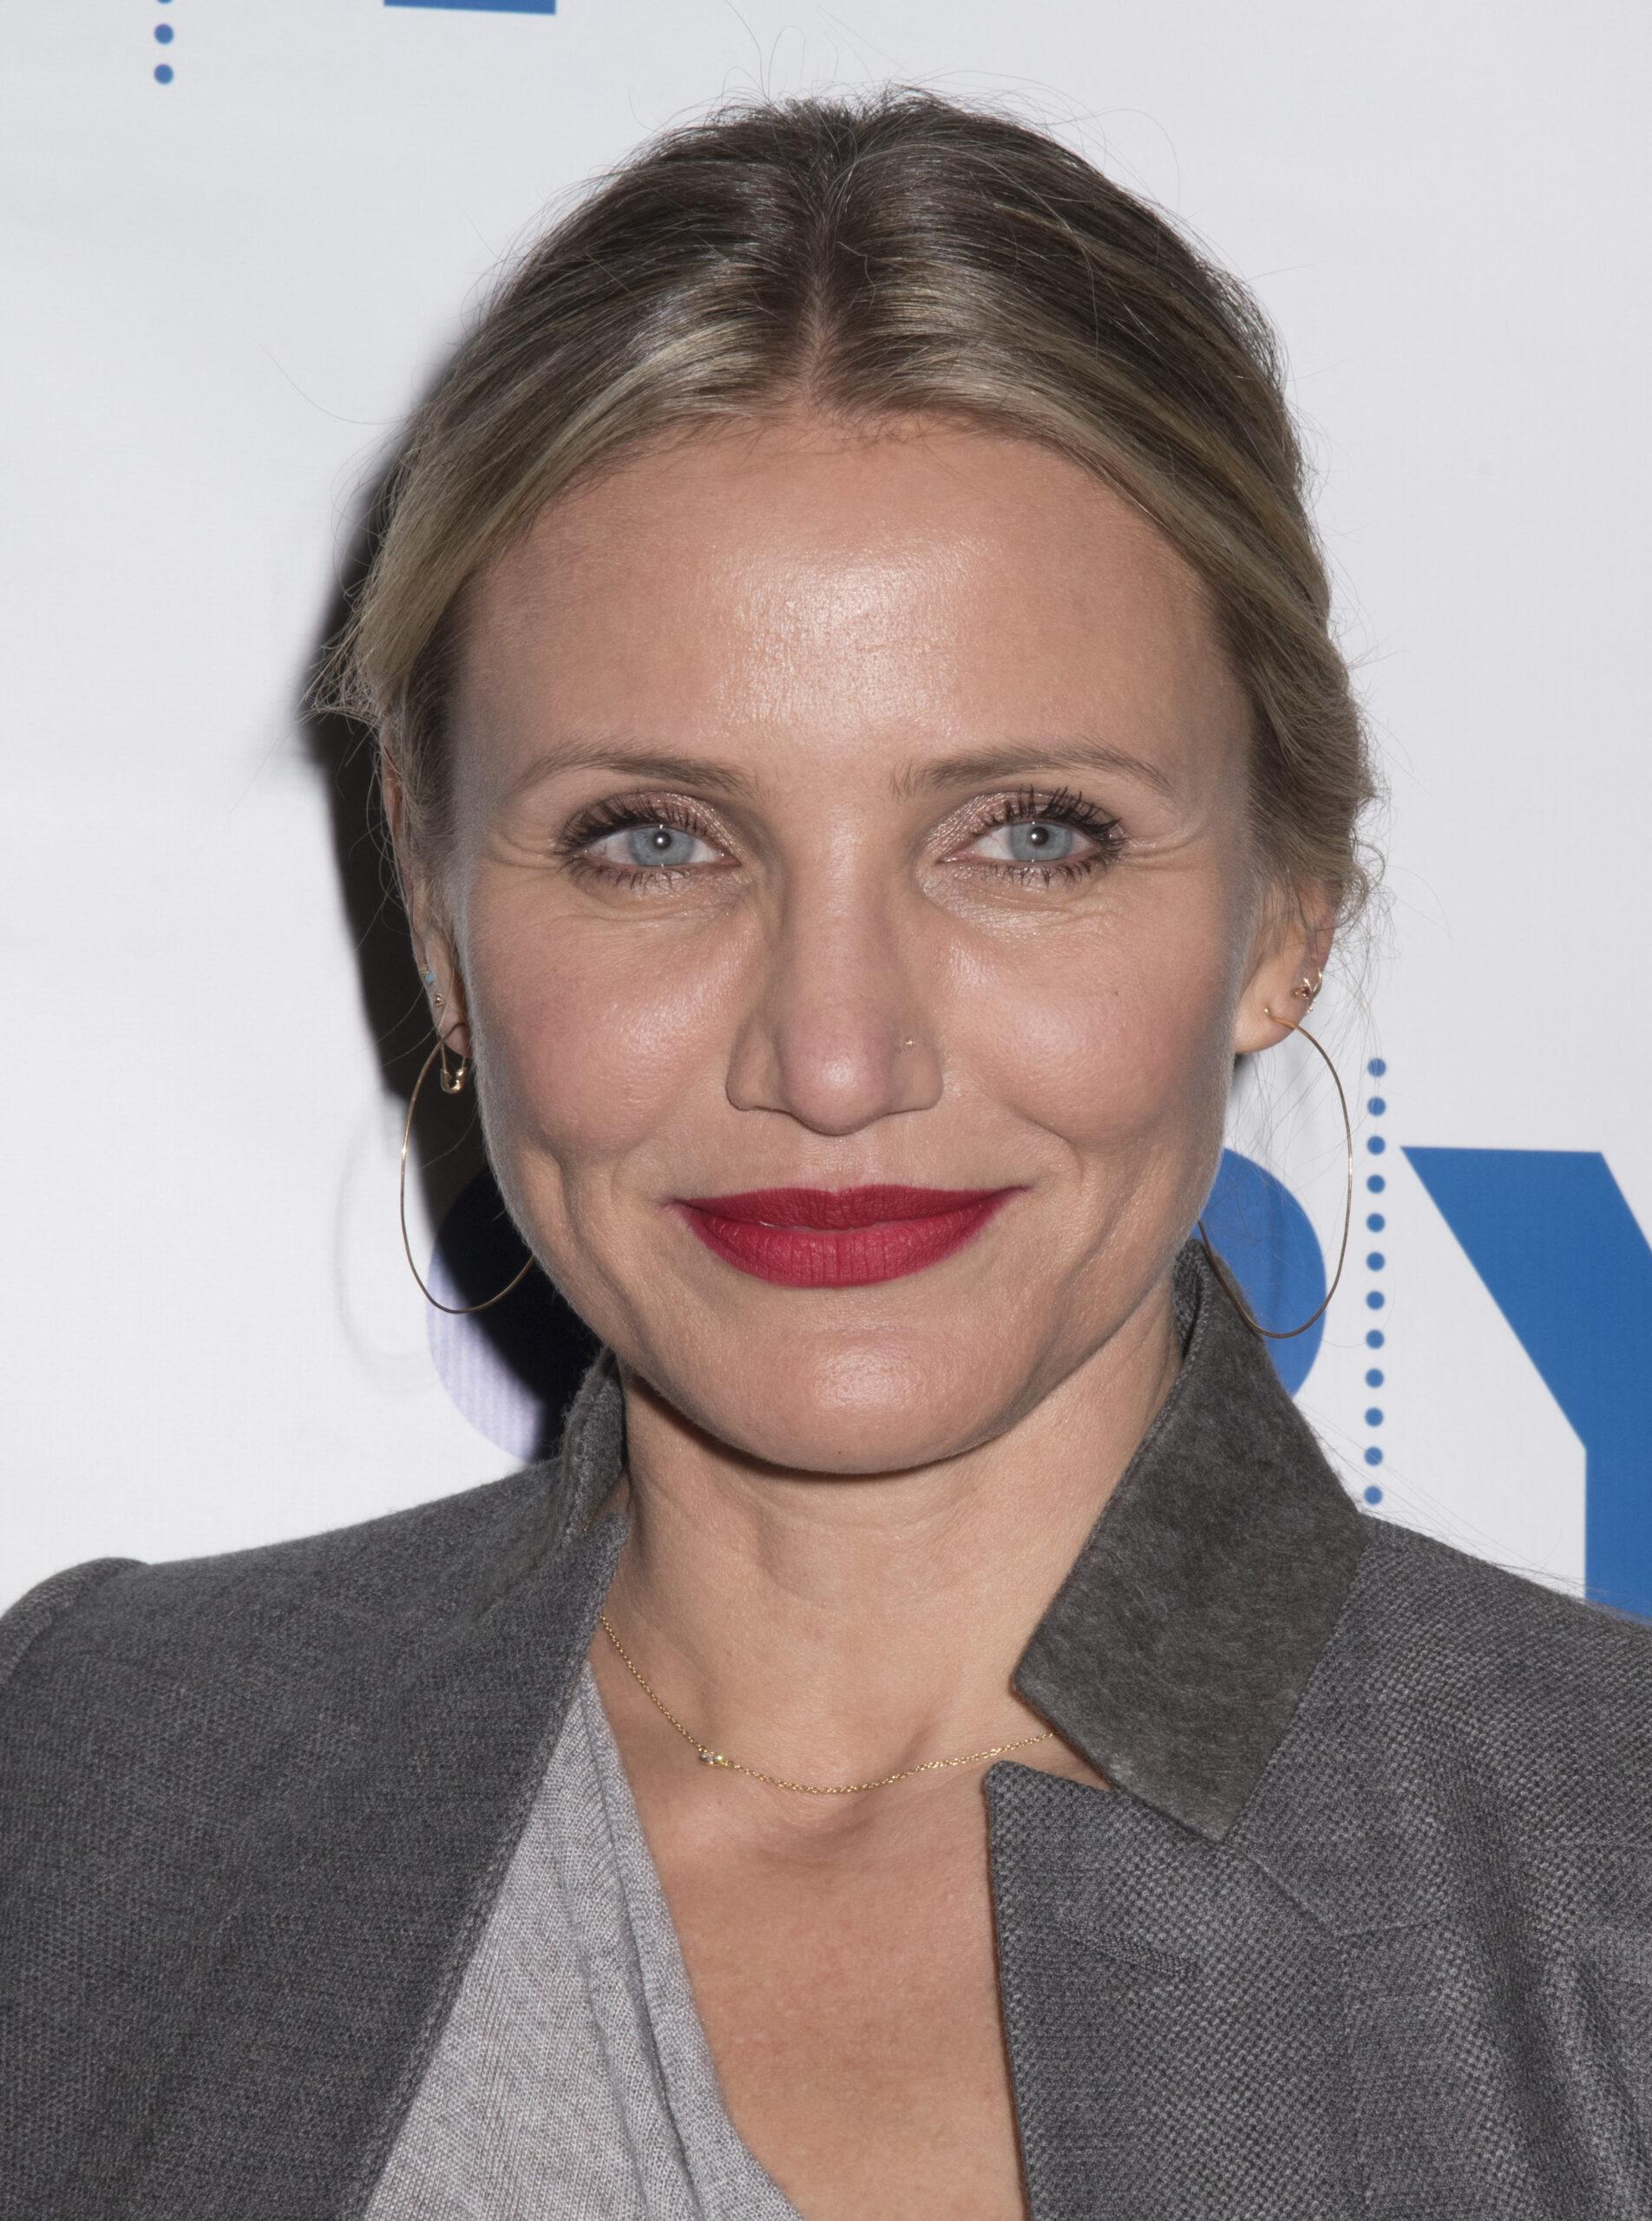 Cameron Diaz Is Reportedly 'Saddened' By Jamie Foxx's Health Battle, Wants To Be 'Supportive'